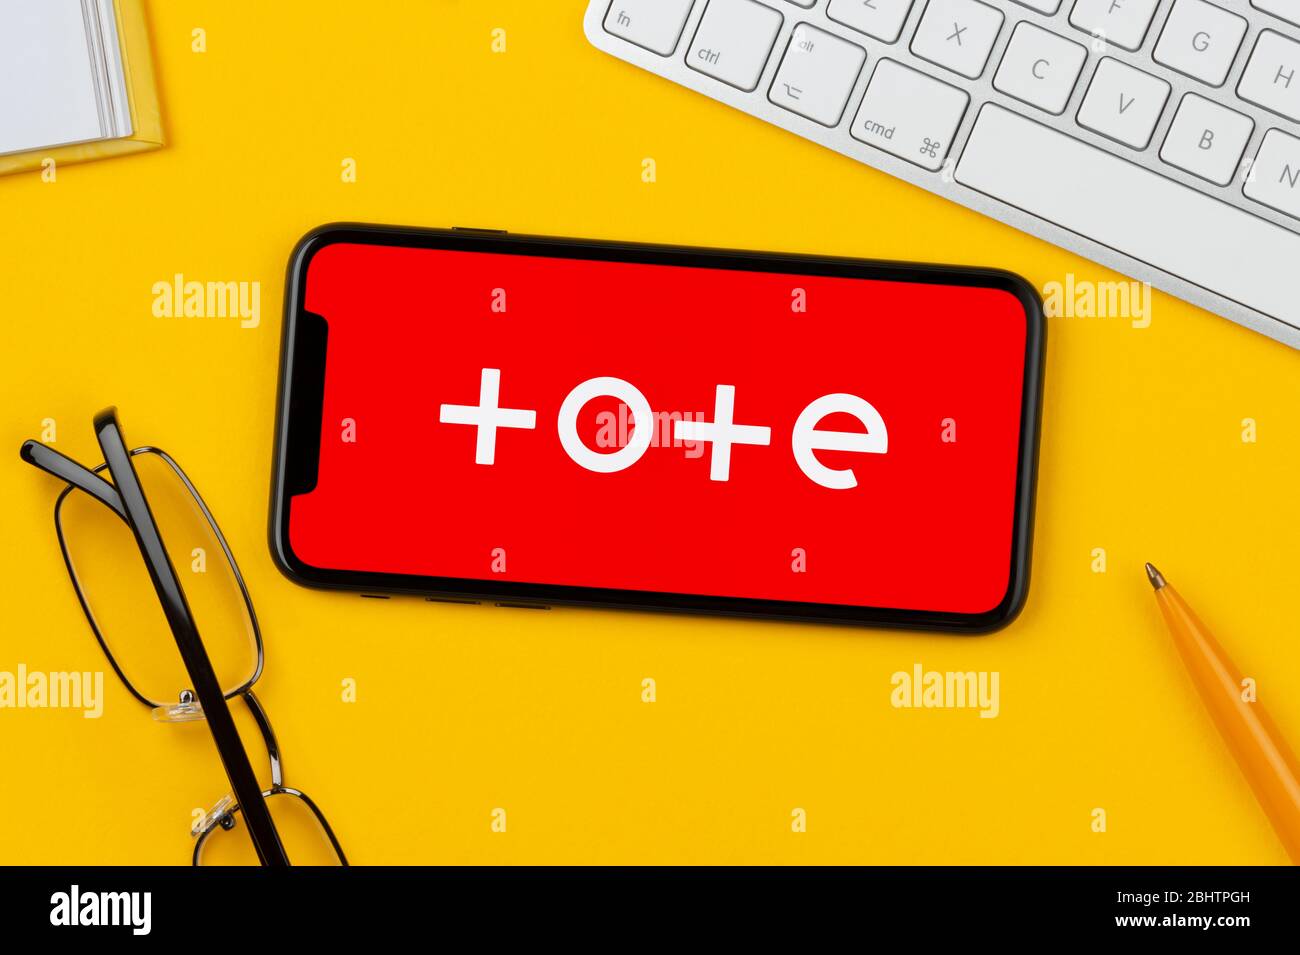 A smartphone showing the Tote logo rests on a yellow background along with a keyboard, glasses, pen and book (Editorial use only). Stock Photo